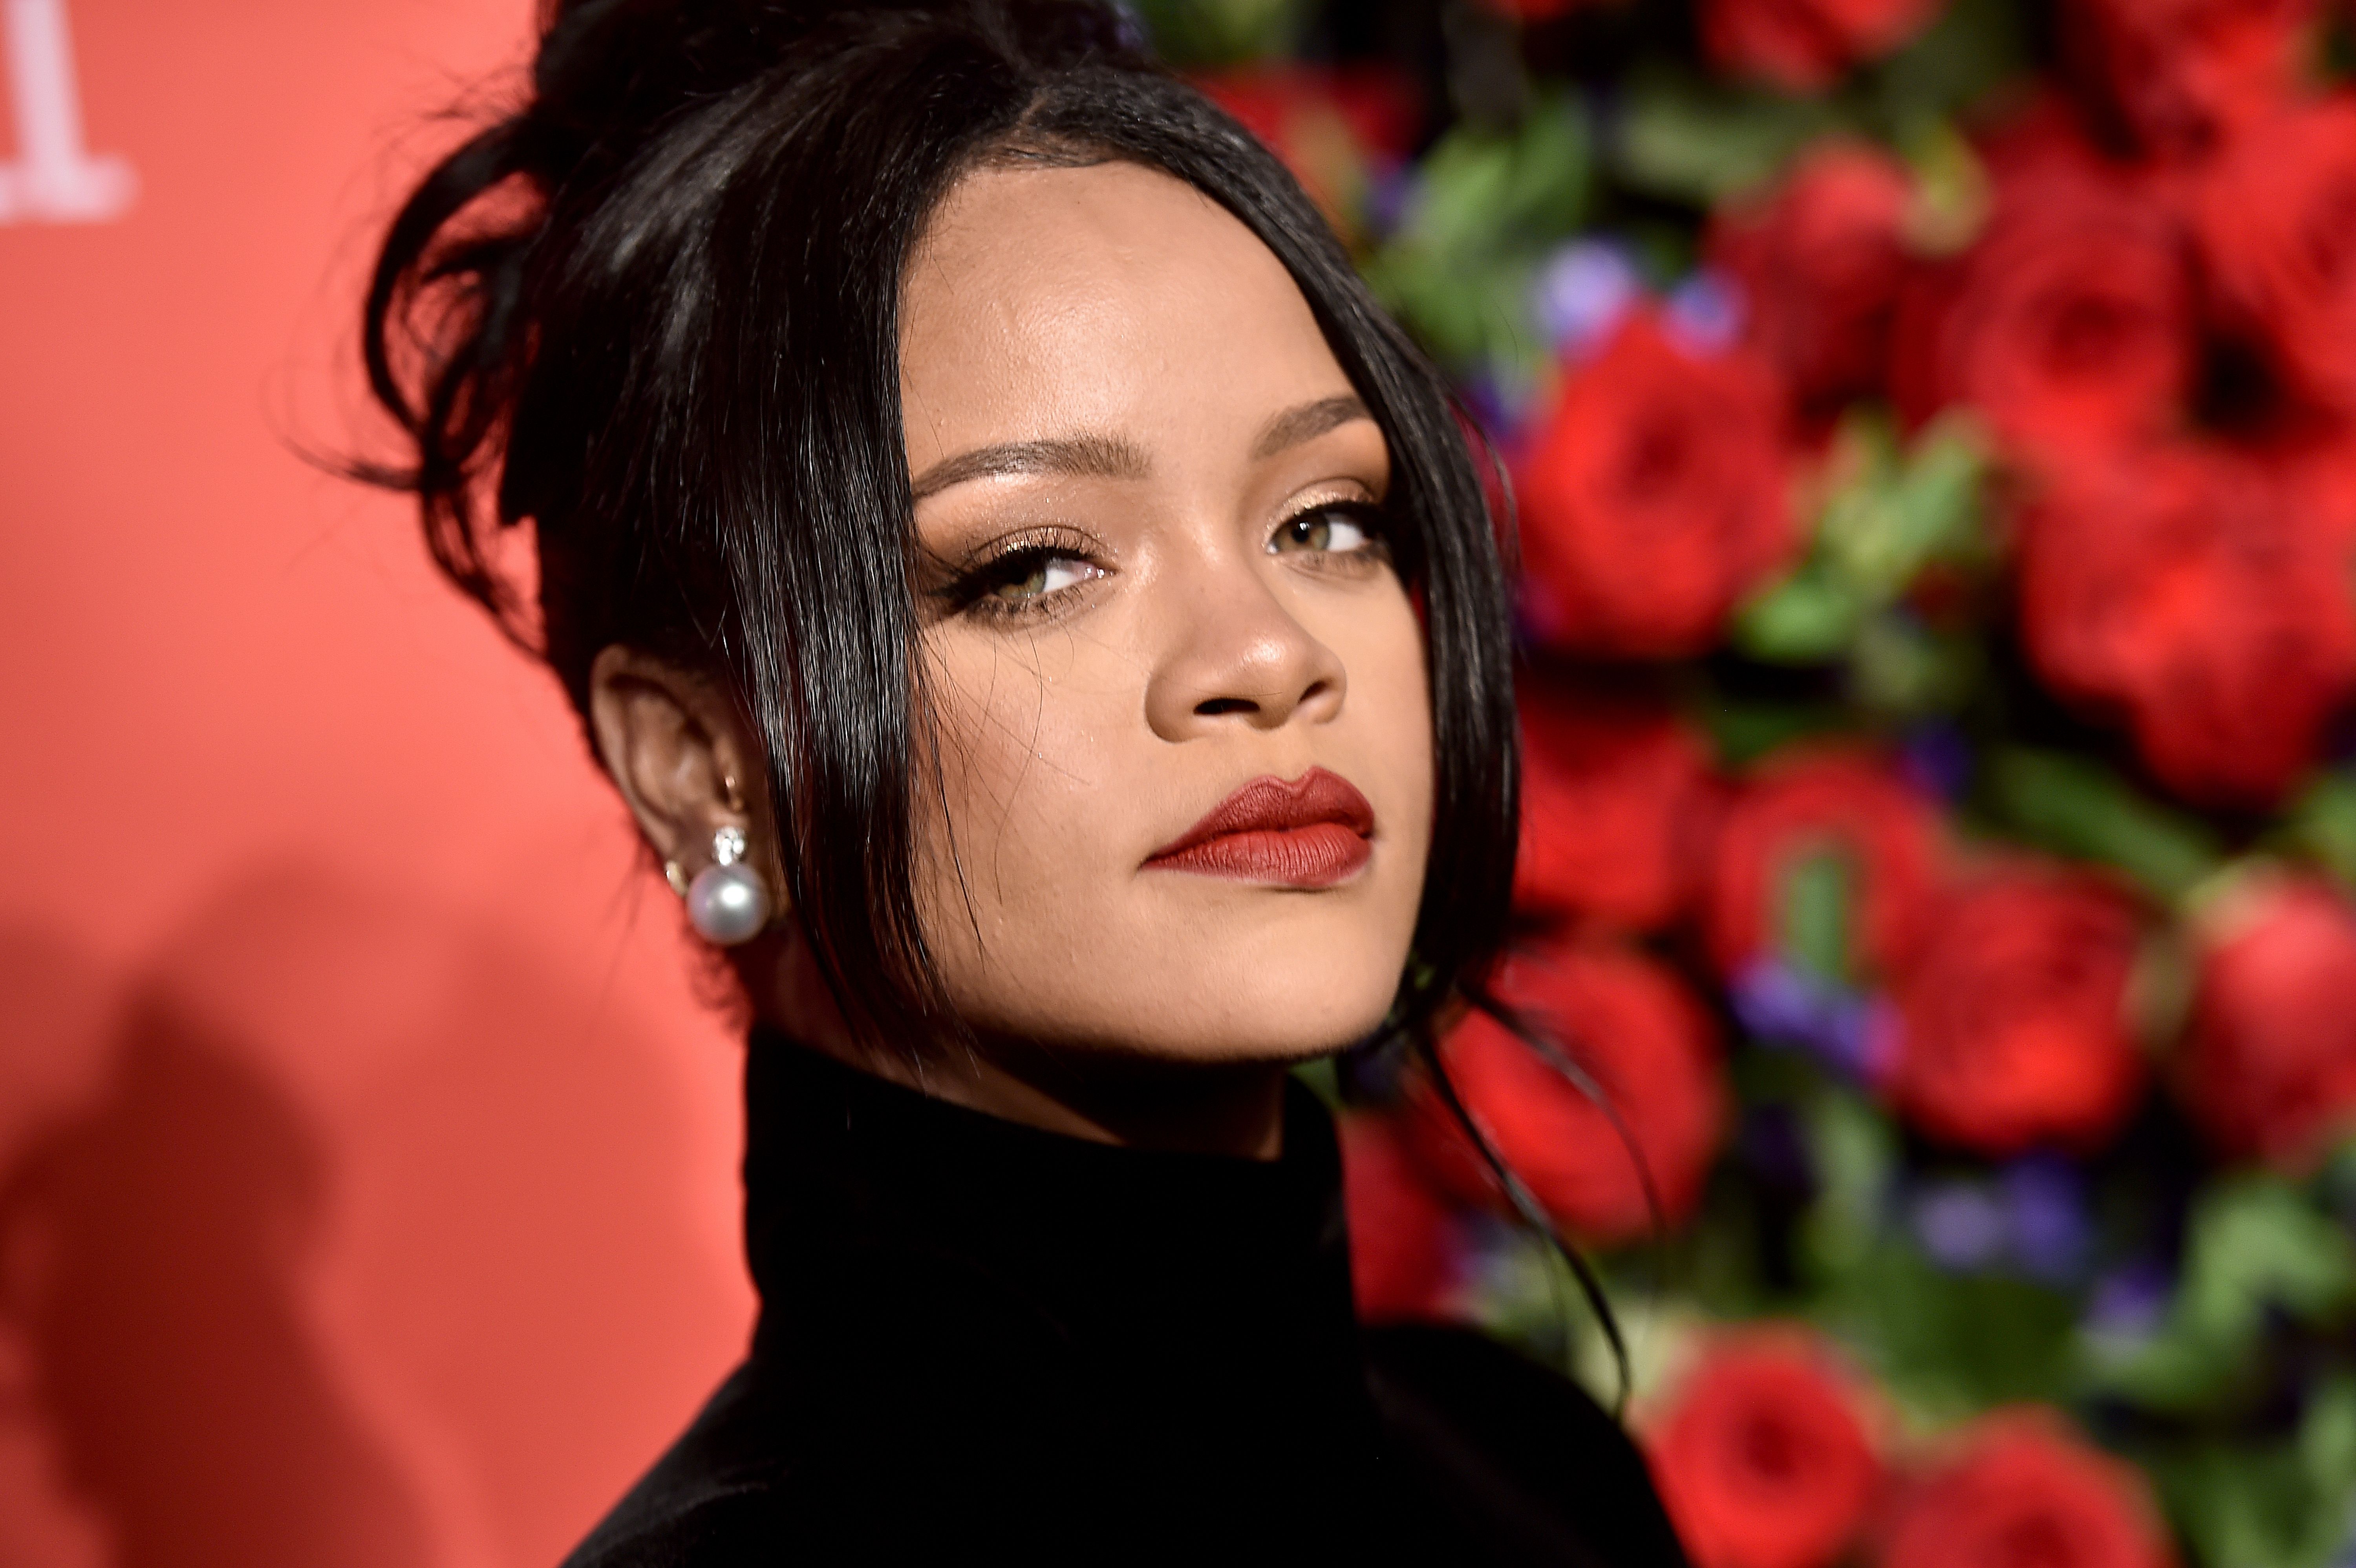 Rihanna embracing single life after ending two year relationship